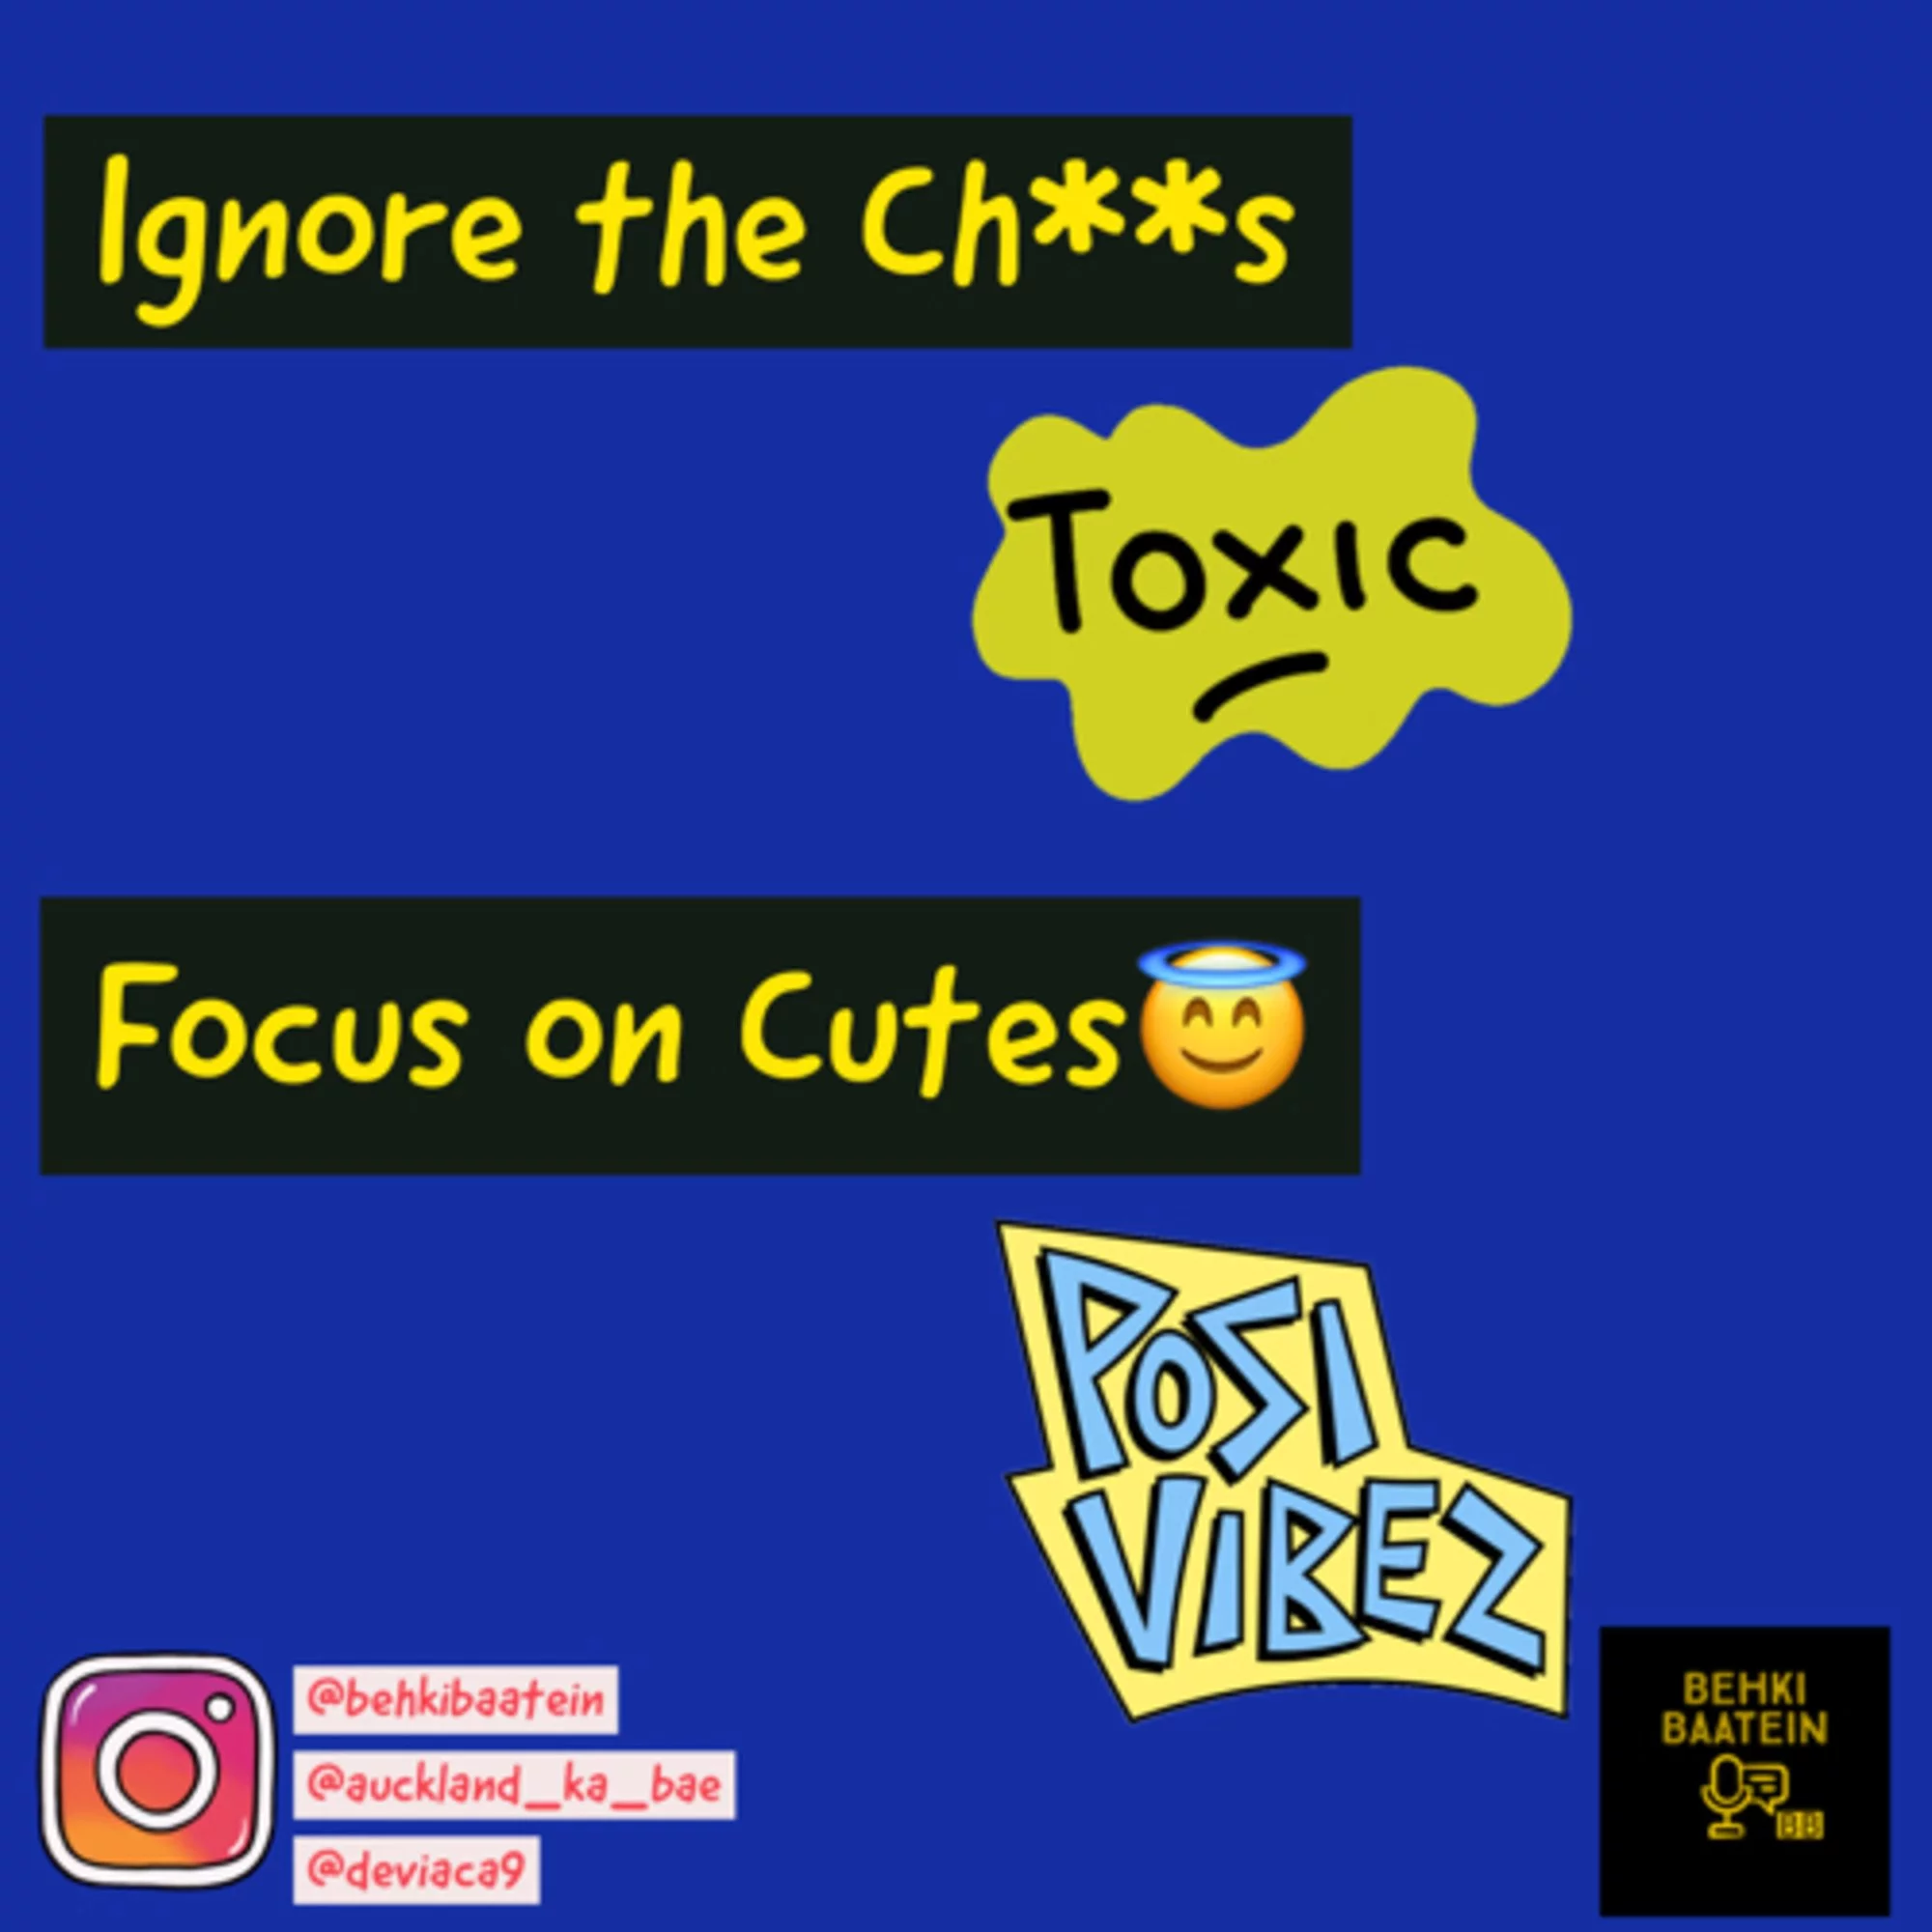 Ep 21:Behki Baatein Podcast-Ignore the Ch**s & Focus on Cutes with Ruzbeh Palseta and Devika Mhetar